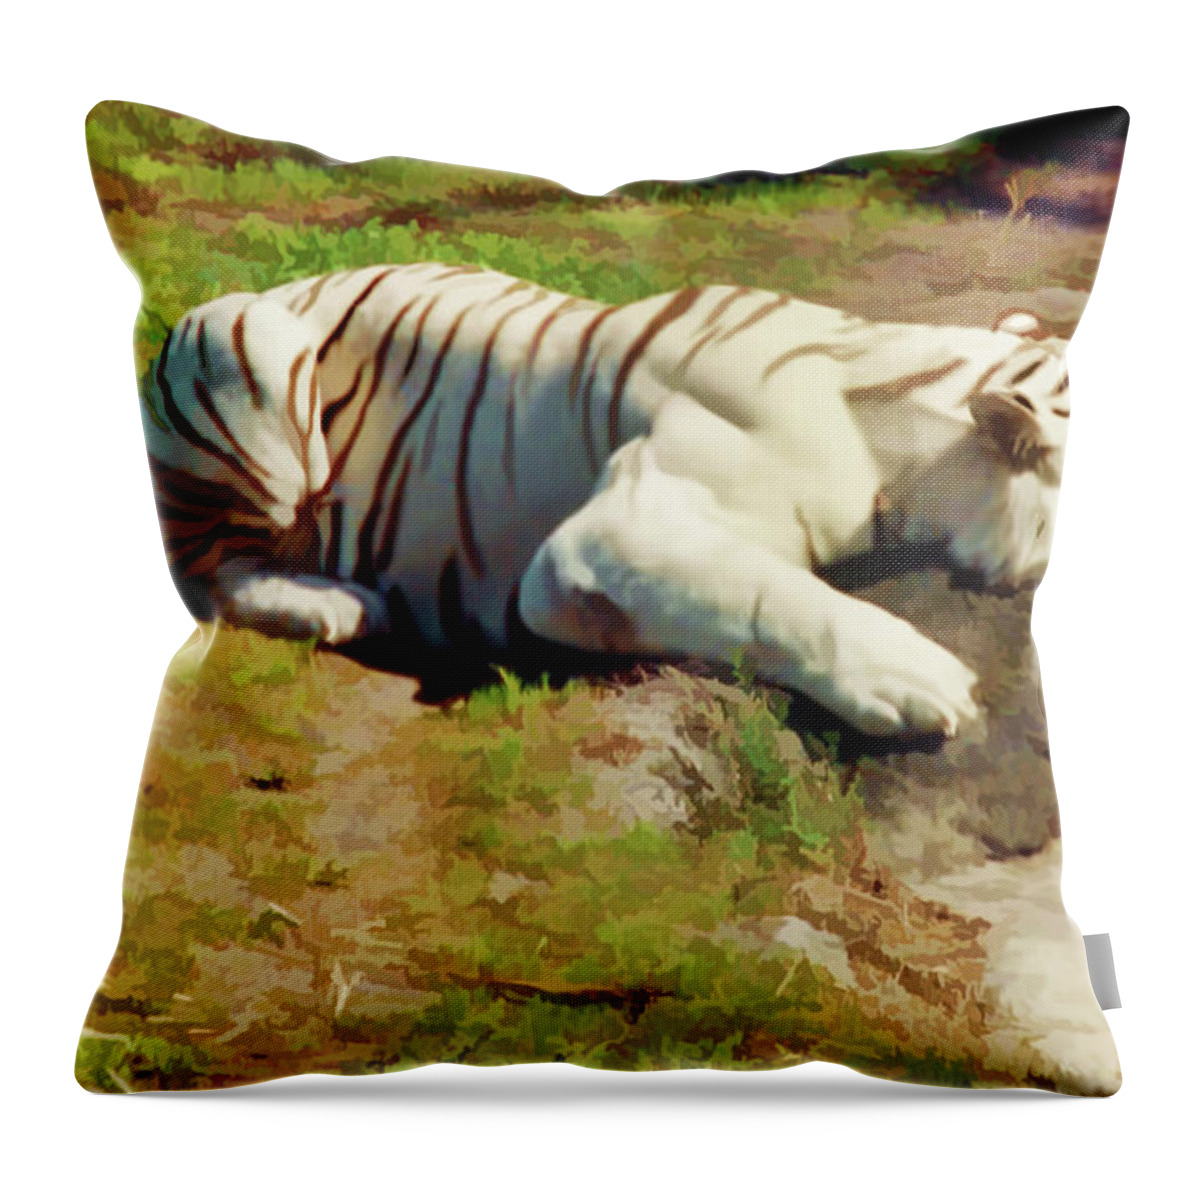 Tiger Throw Pillow featuring the photograph Exhausted - Tiger by D Hackett